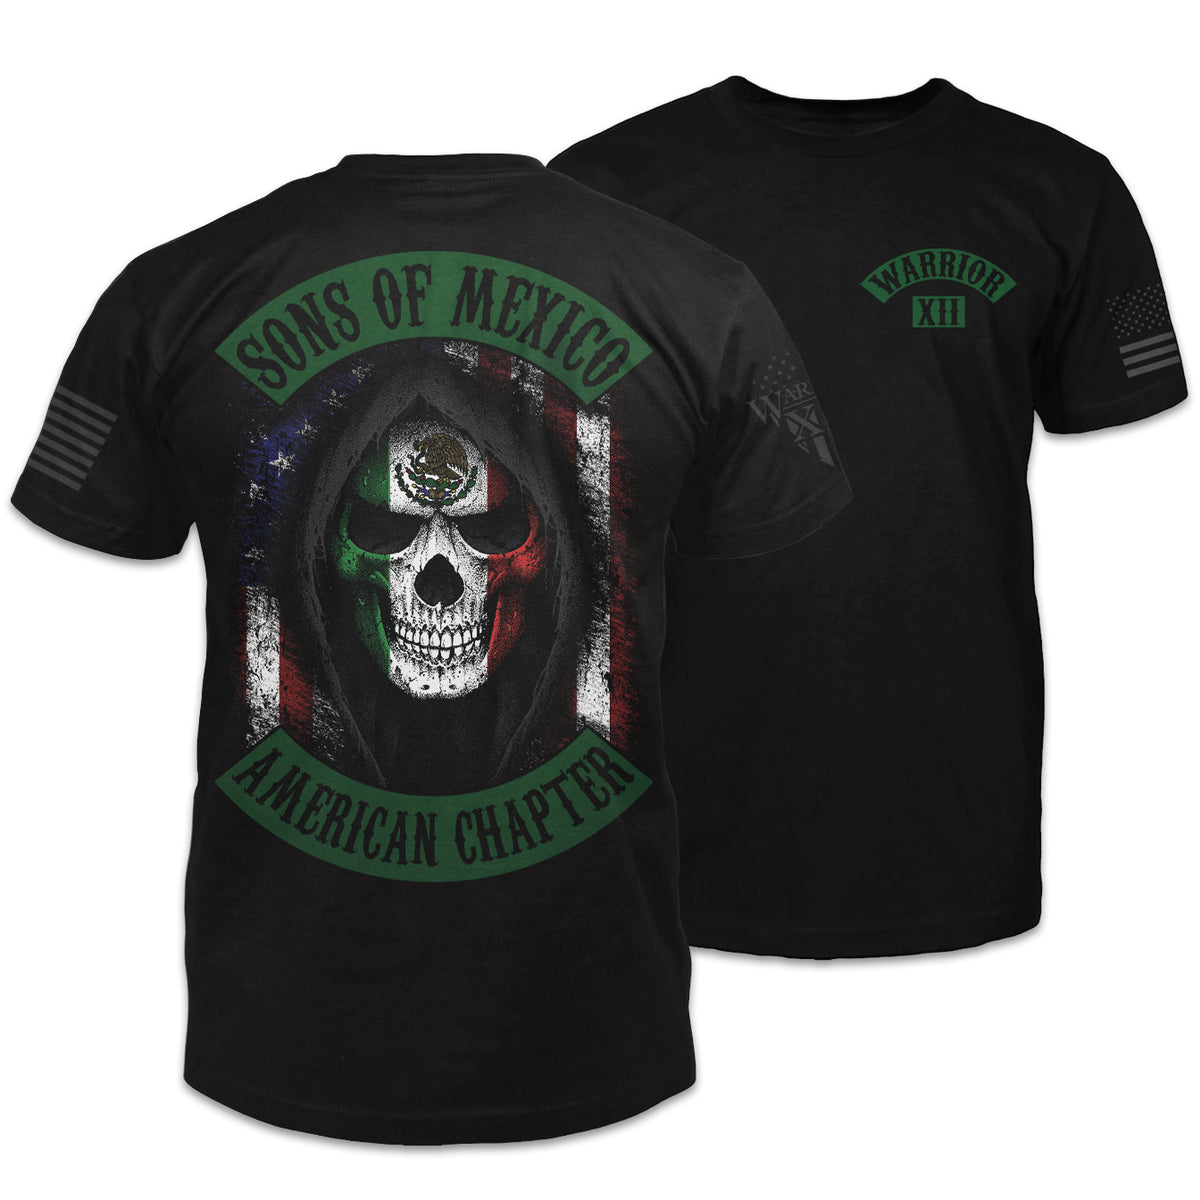 Front and back black t-shirt with the words "Sons of Mexico - American Chapter" with a hooded Mexican skeleton with an American flag behind printed on the shirt.